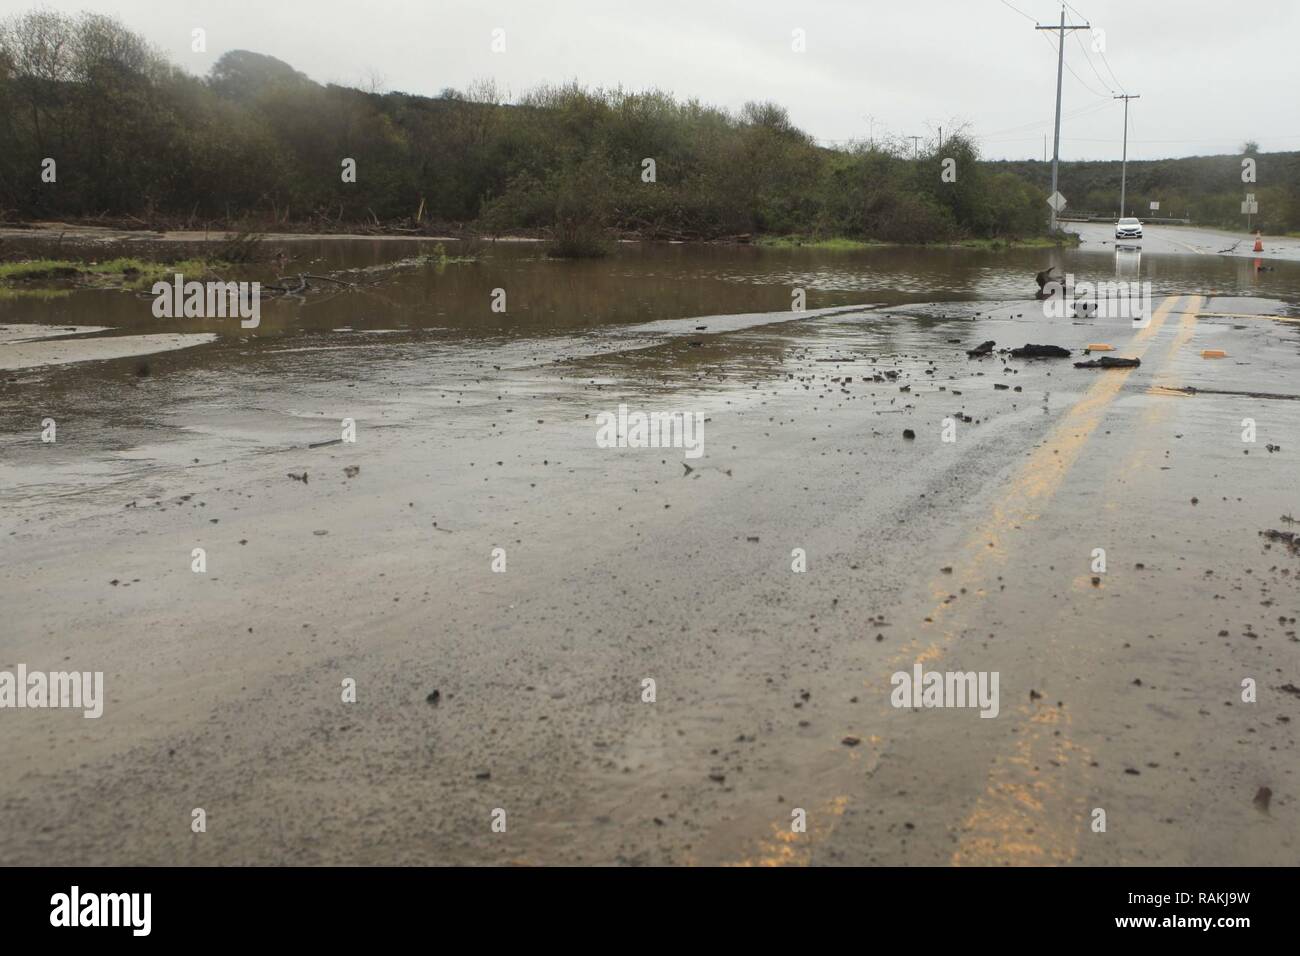 The intersection of Stuart Mesa road and Las Pulgas road is closed due to the excessive rain on Marine Corps Base, Camp Pendleton, Calif., Feb. 18, 2017. Stock Photo